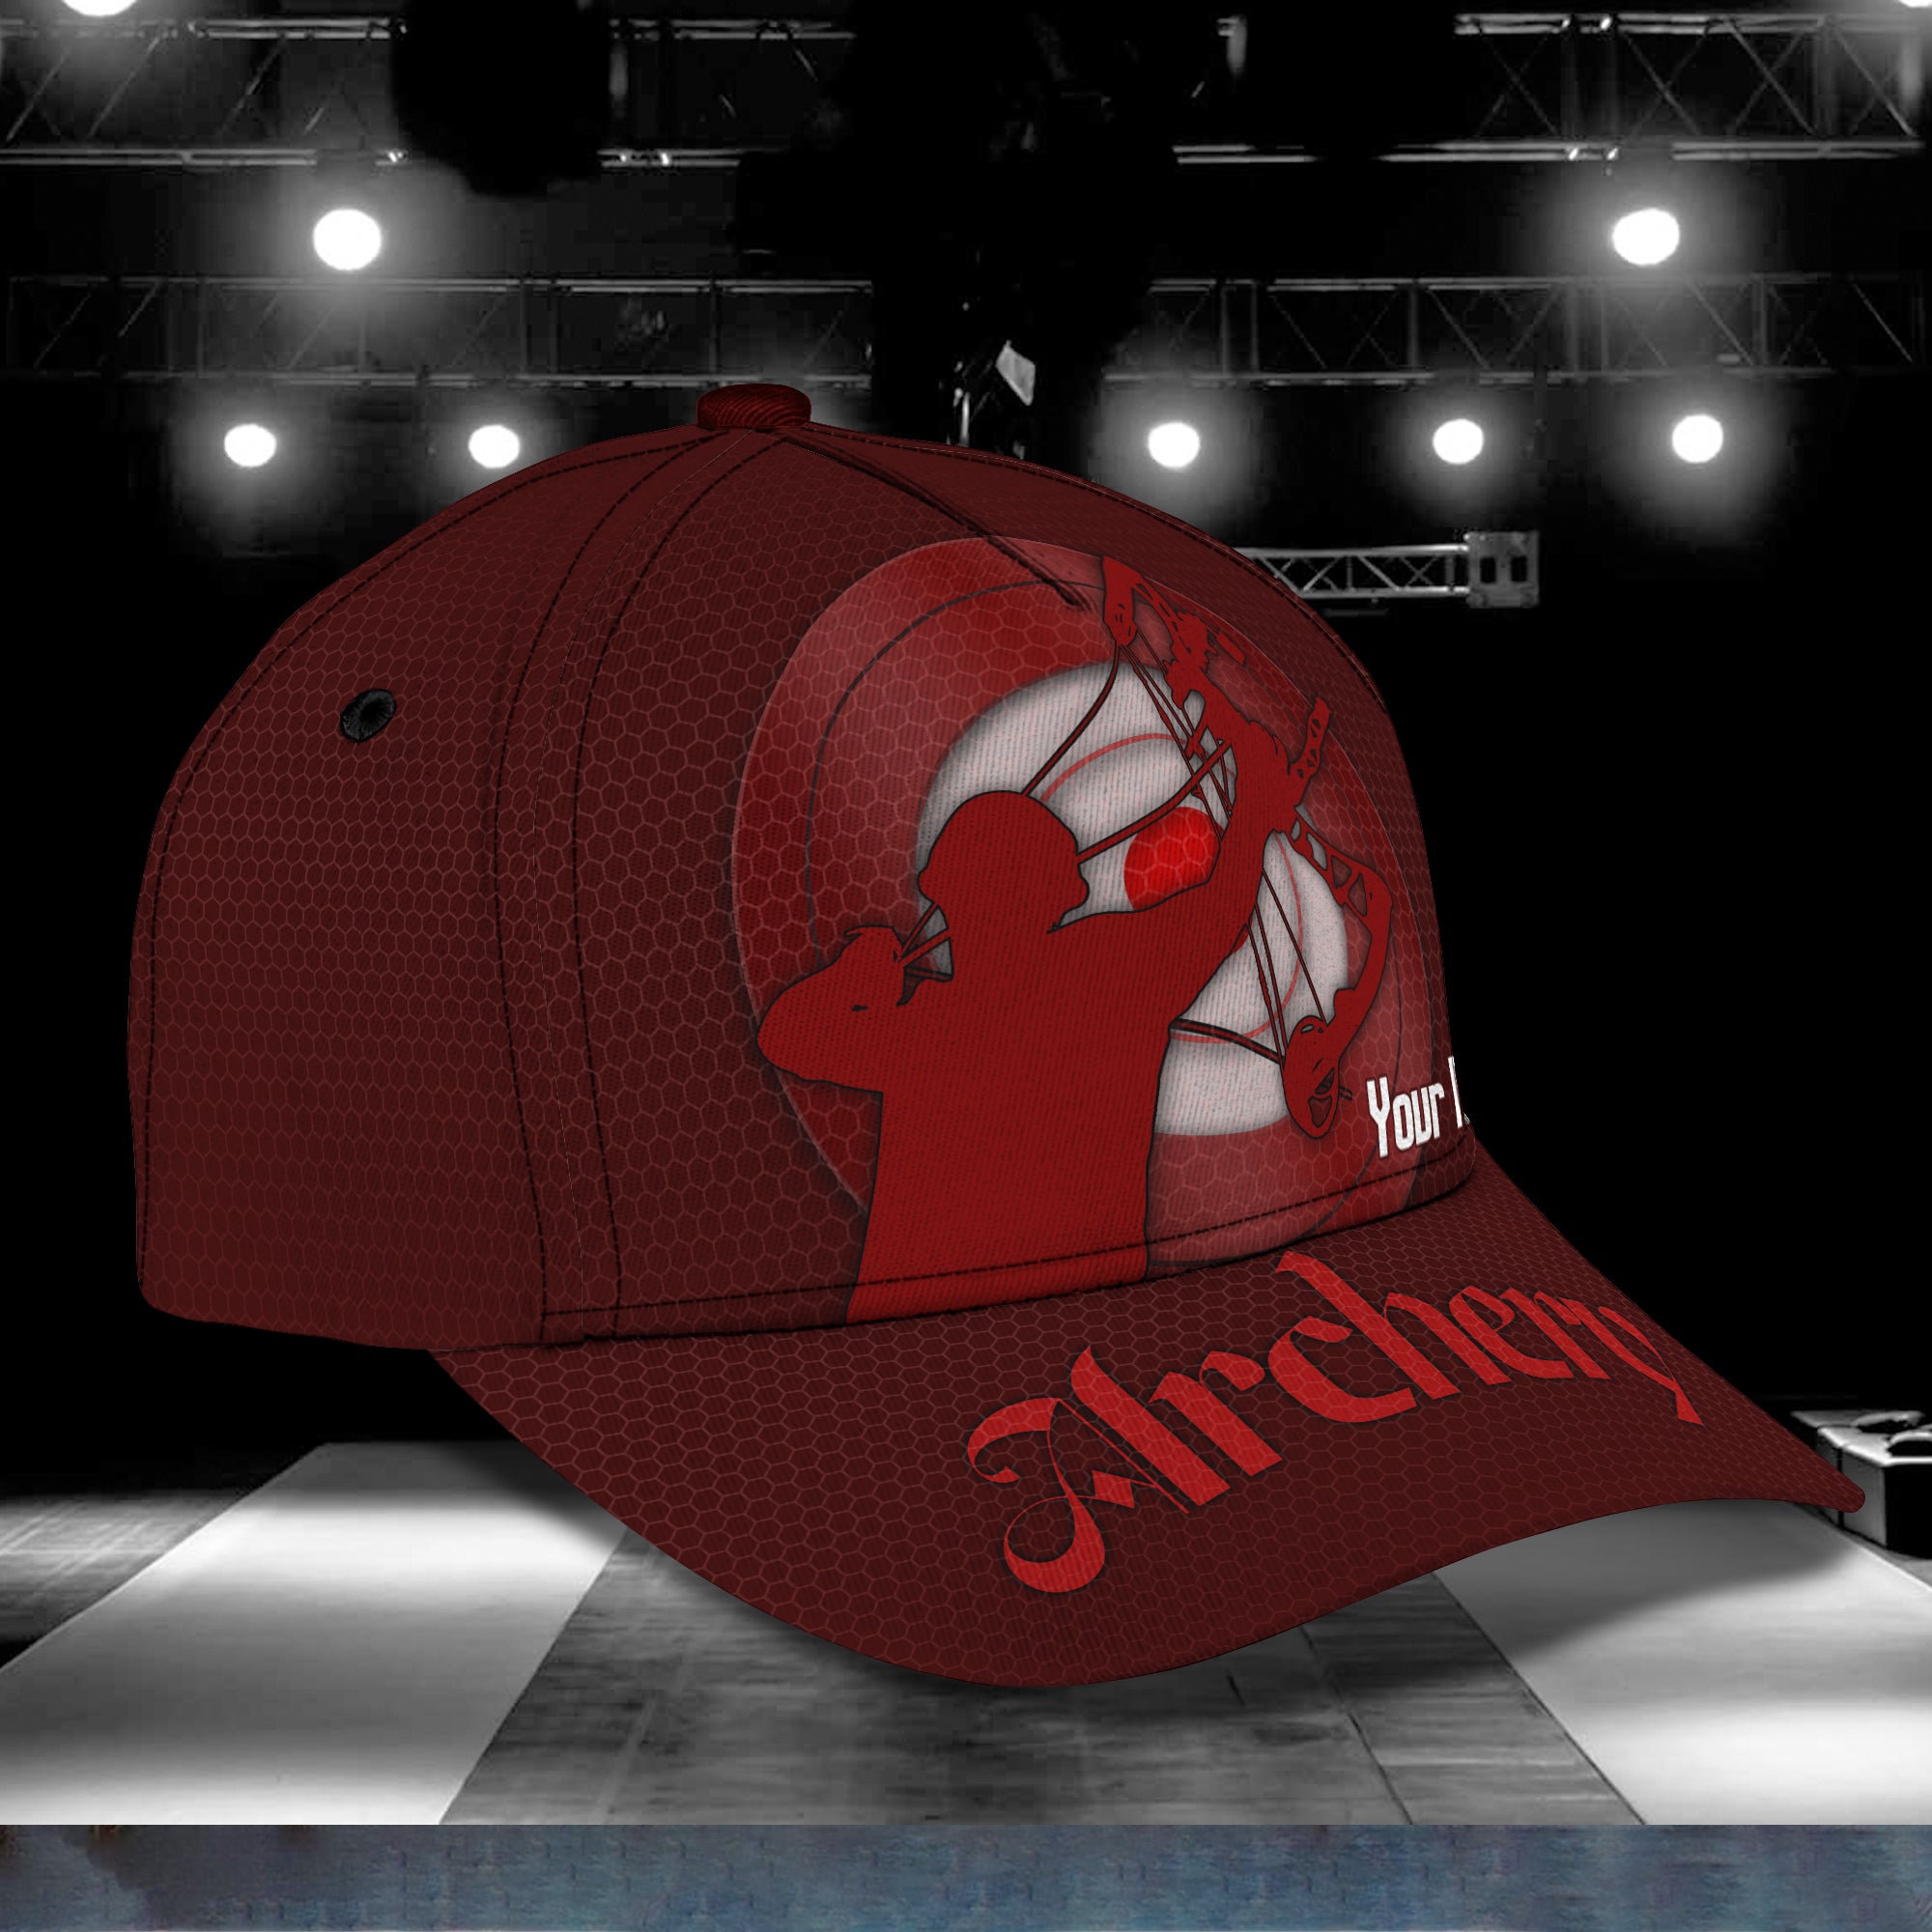 Archery Red - Personalized Name Cap 45 - Nvc97